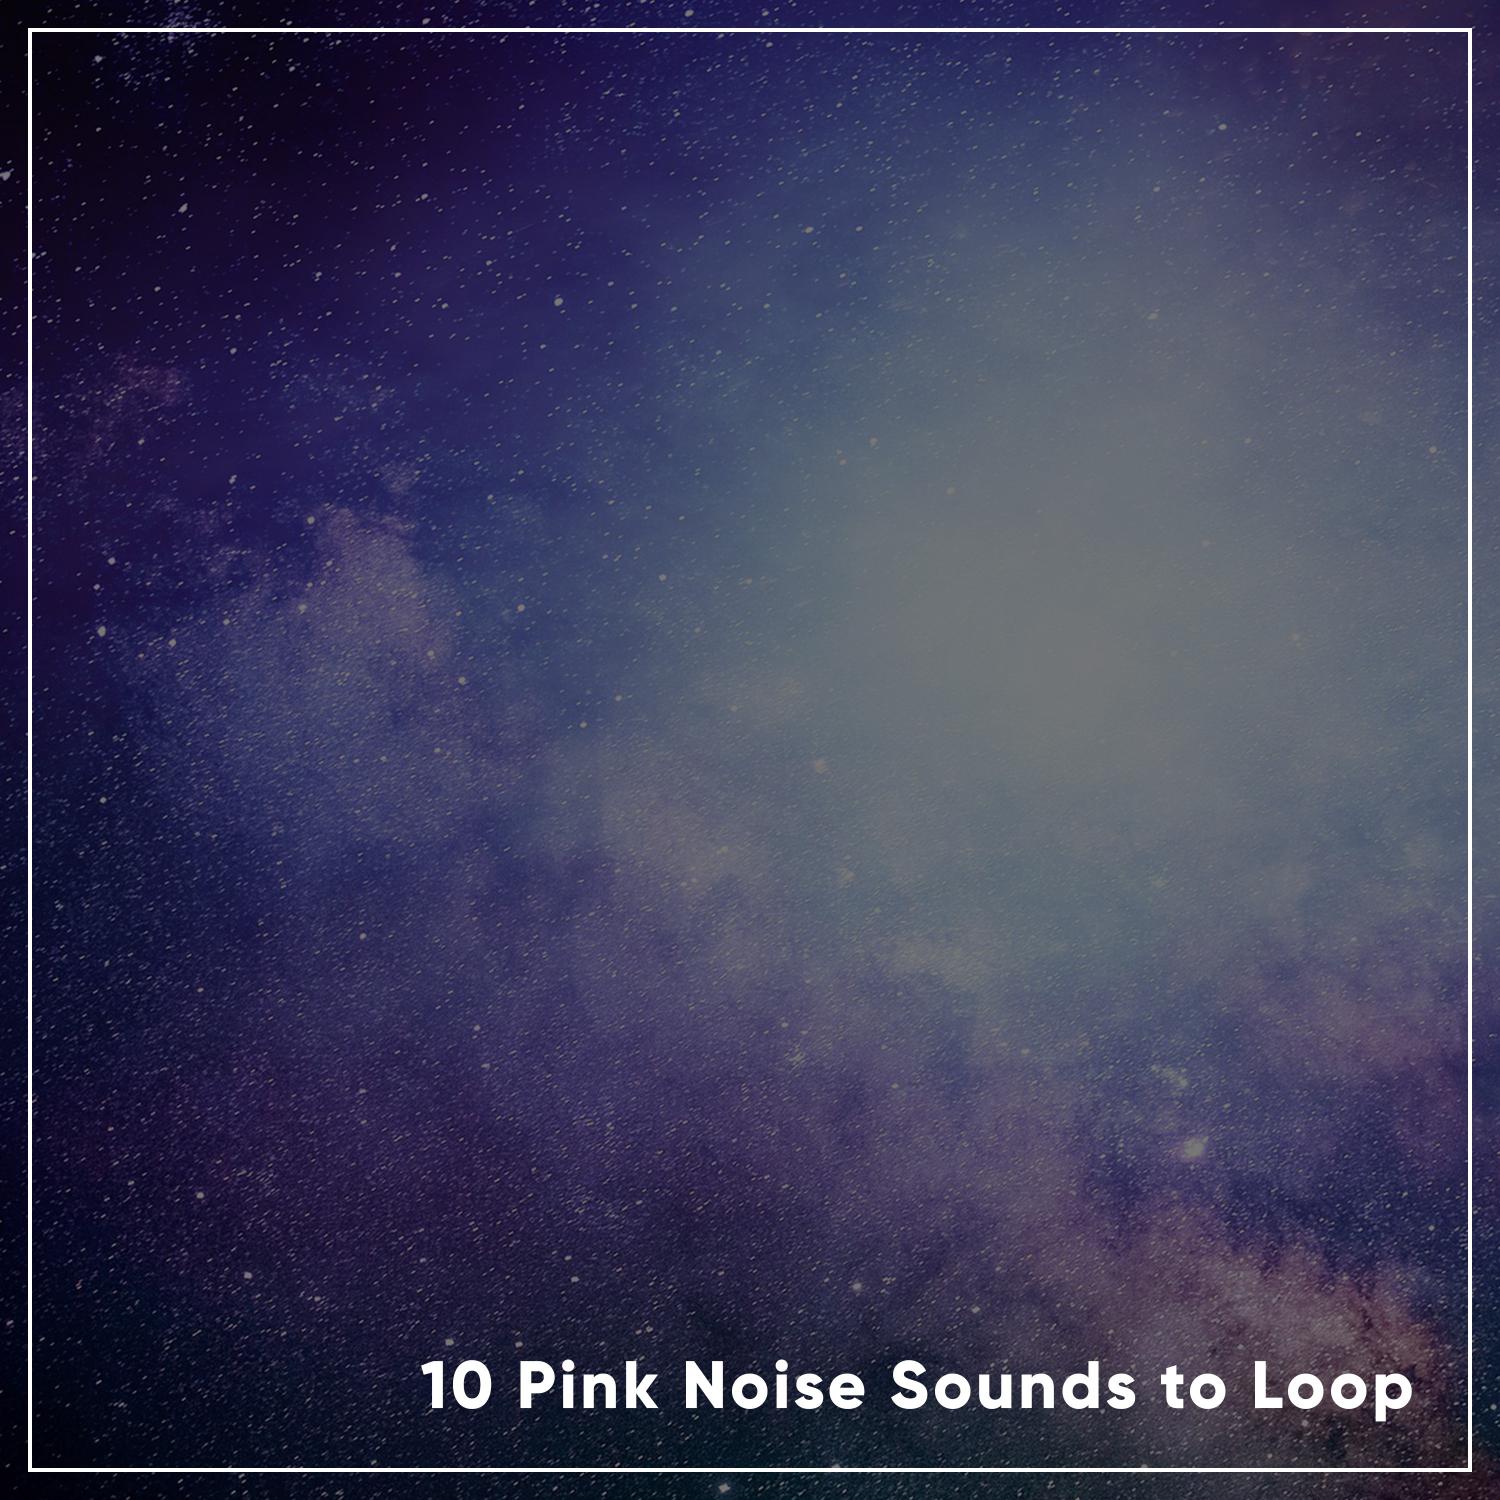 10 Pink Noise Sounds to Loop